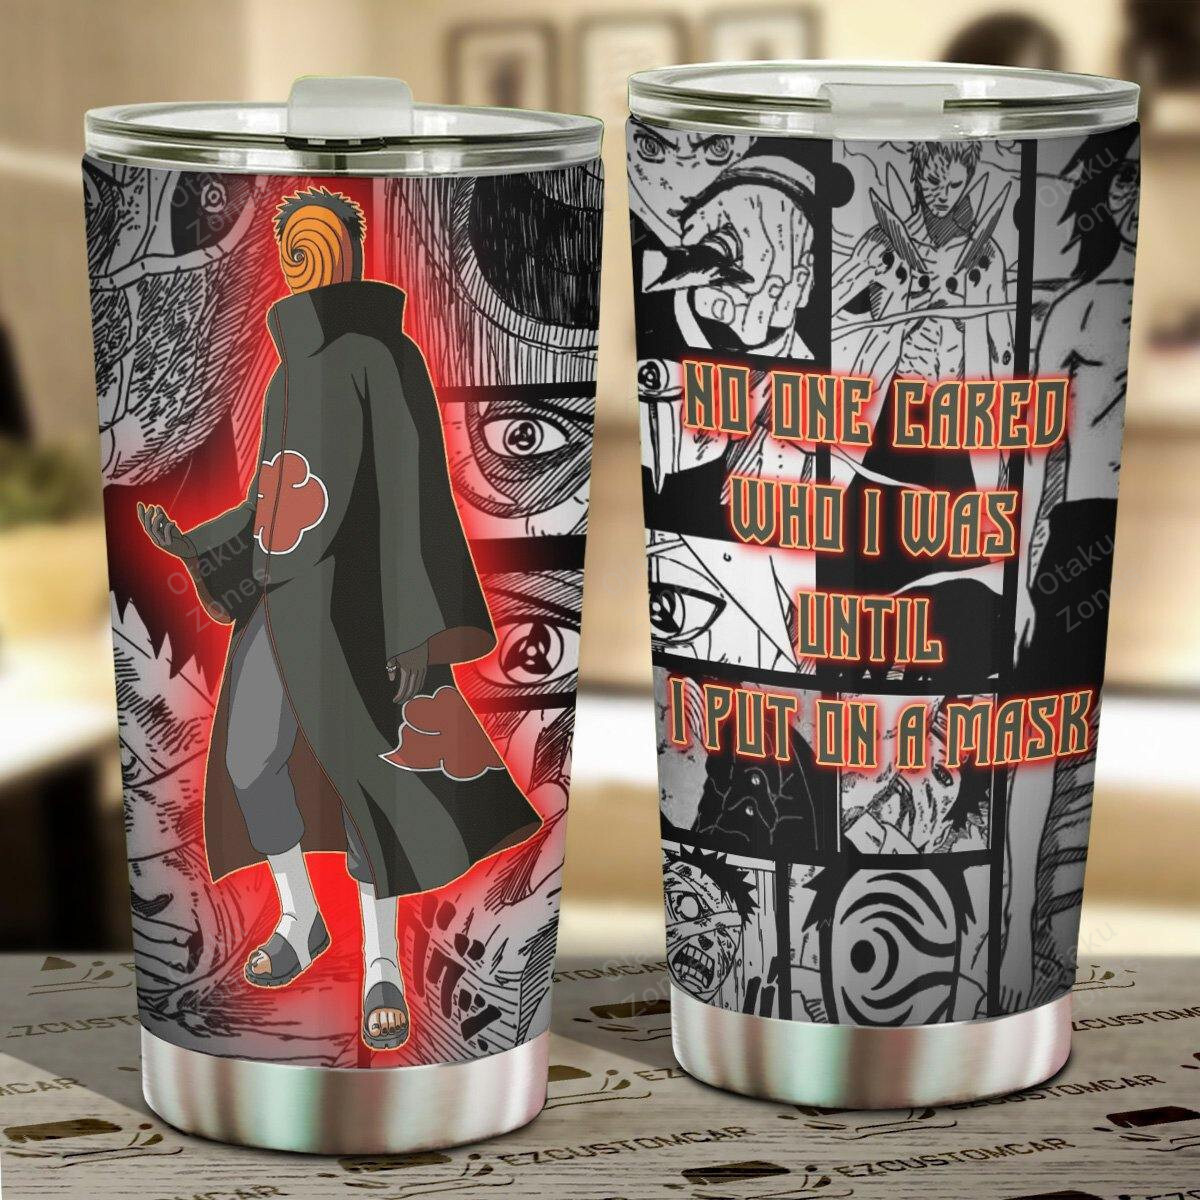 Go ahead and order your new tumbler now! 84